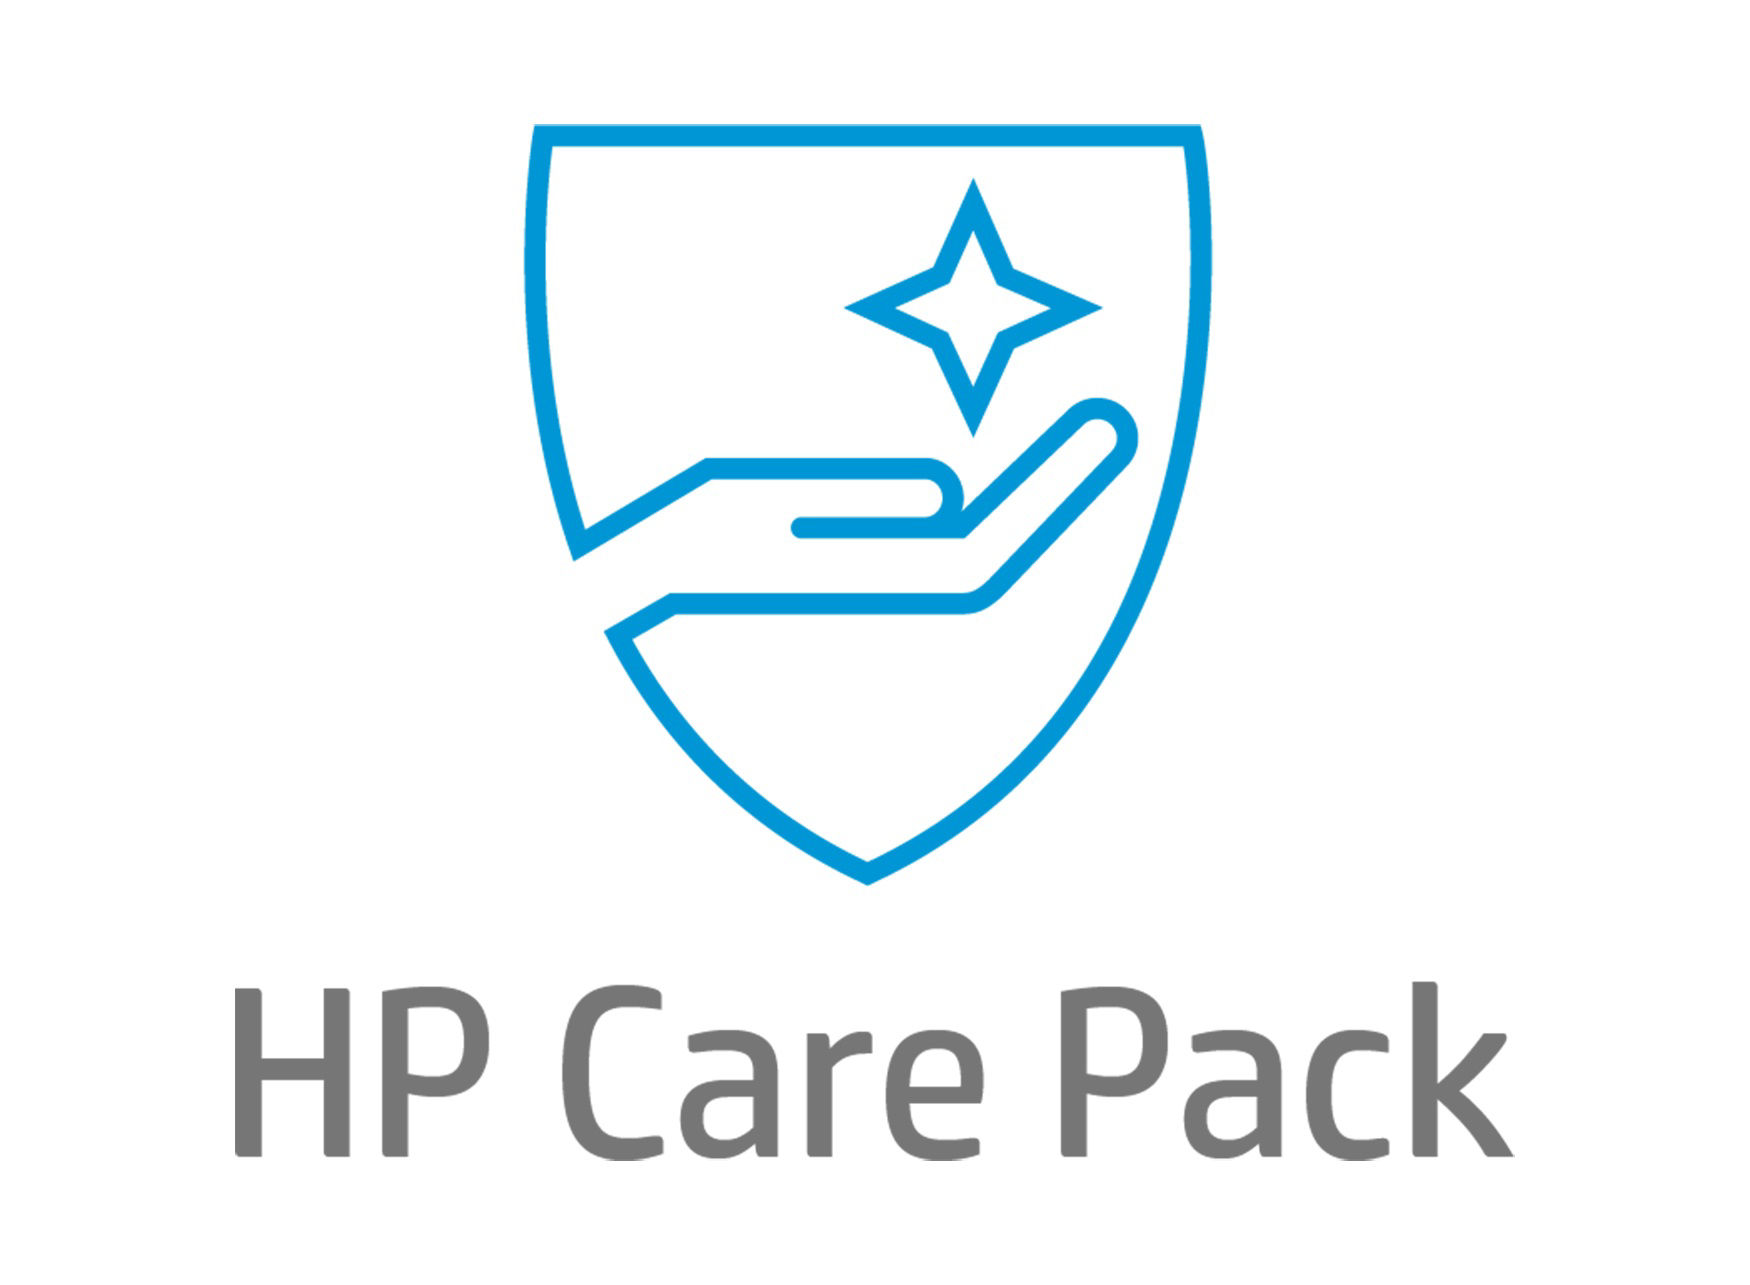 HP Care Pack Specification Sheet PDF